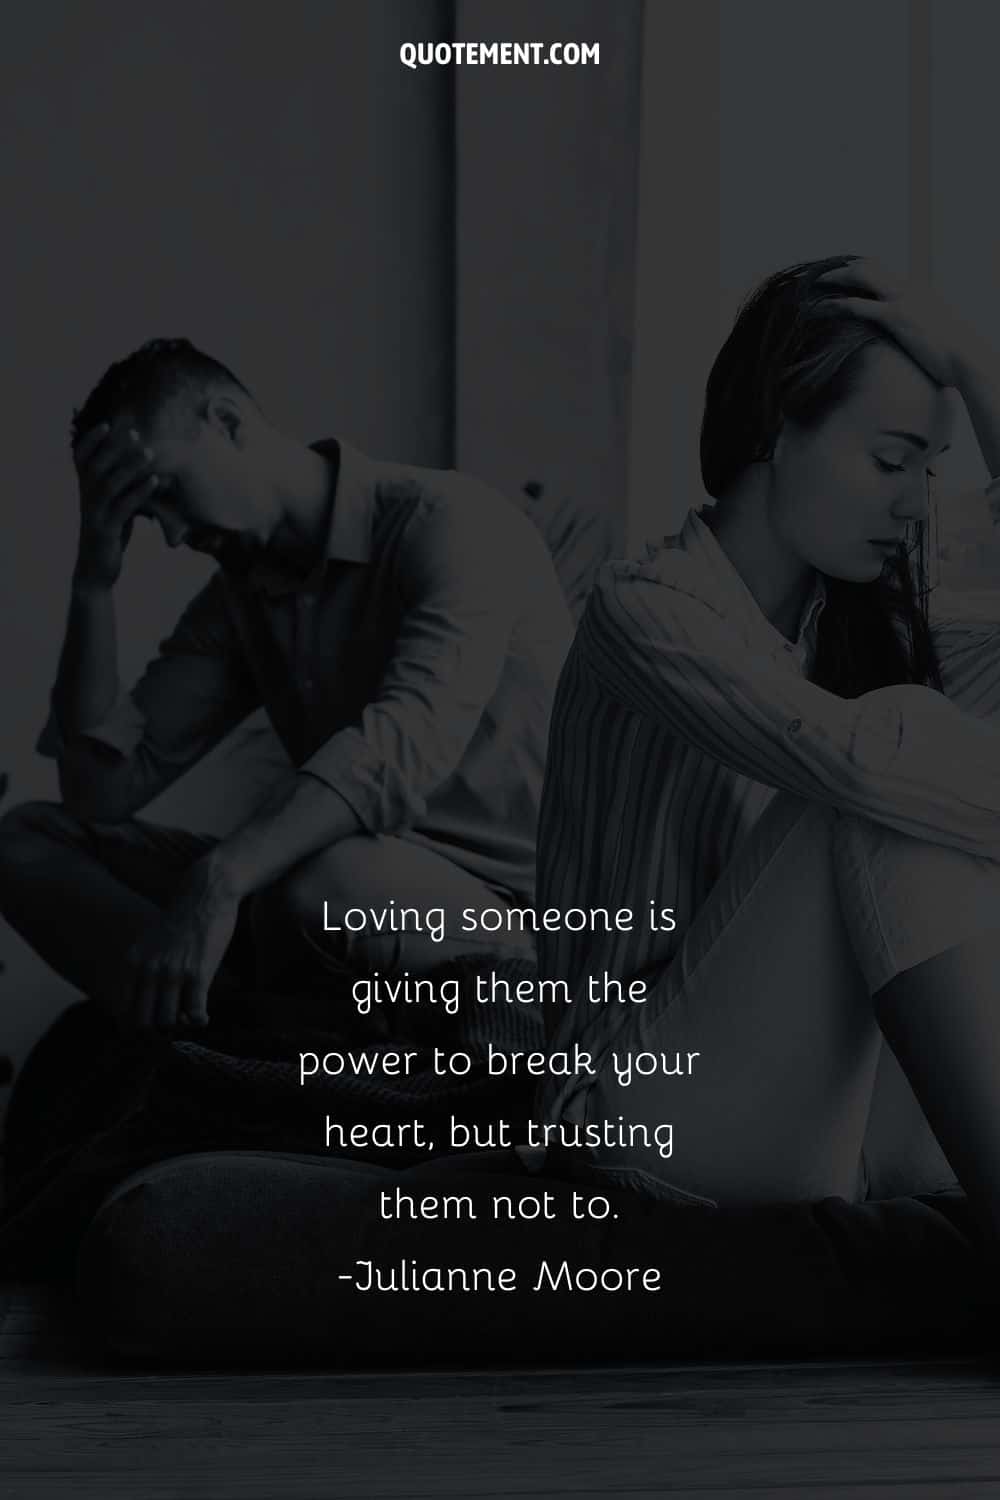 Loving someone is giving them the power to break your heart, but trusting them not to